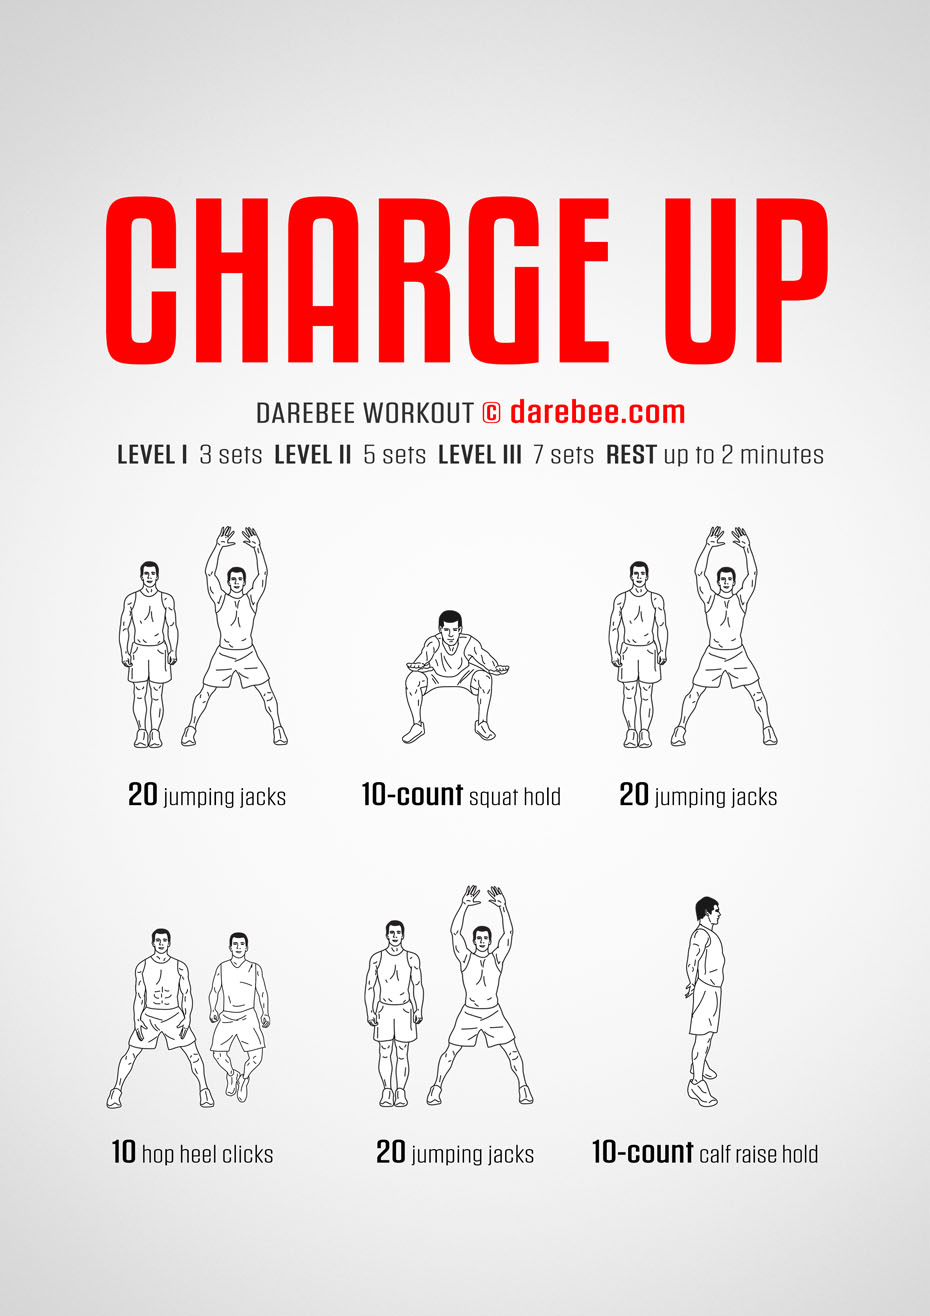 Charge Up is the perfect Darebee home-fitness workout for a day when you want to change your mood for the better, de-stress and just feel like you're working to be the best version of you.